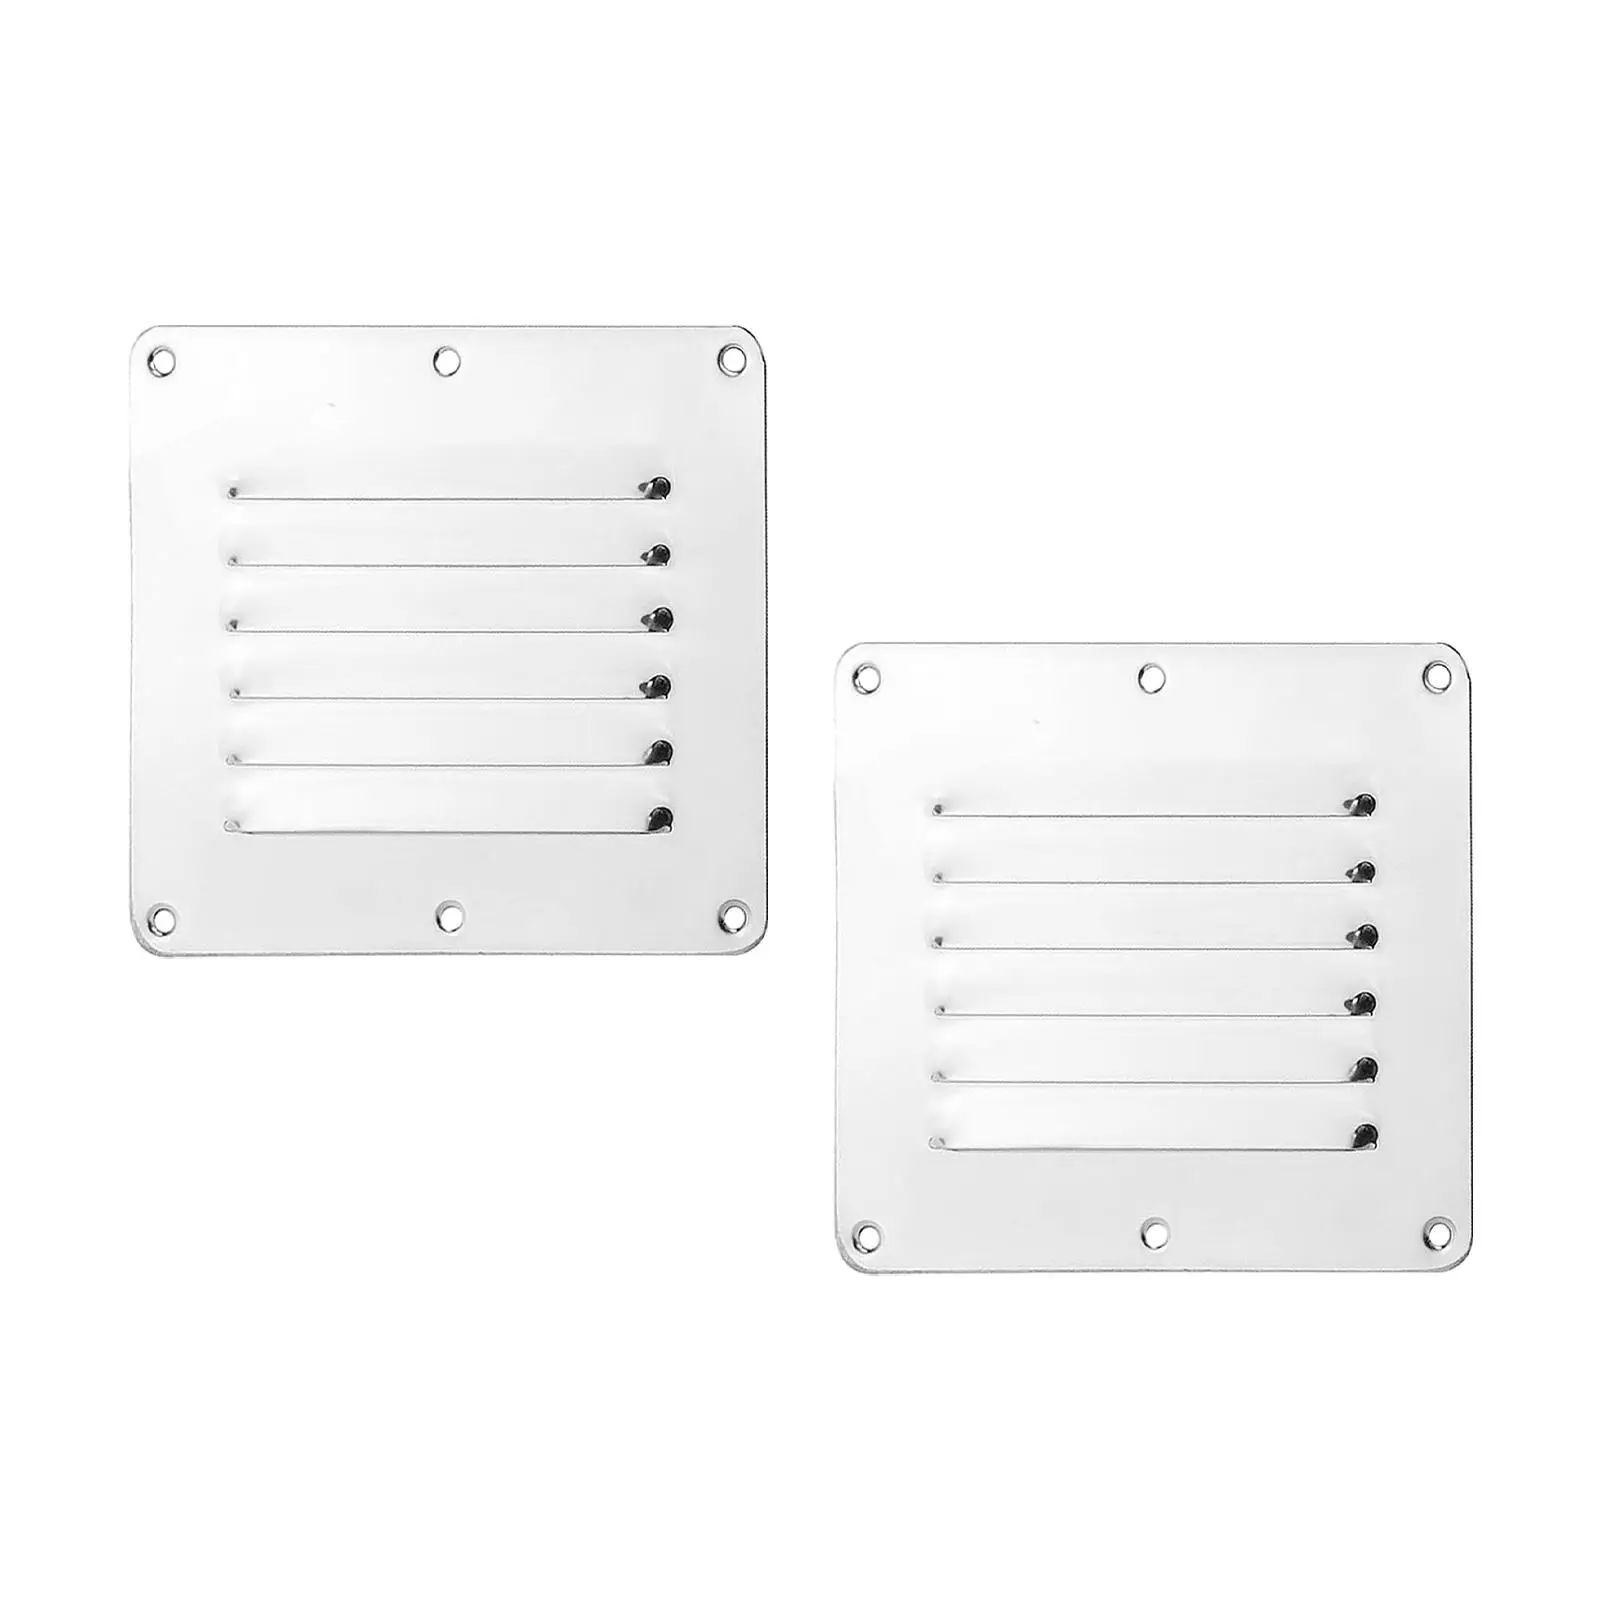 2x Vent Louver Grill 12.7x11.5cm Vent Hood Air Outlet Vents Air Ventilation Cover for Wall Sailing Boat Yacht Ceiling Sidewall